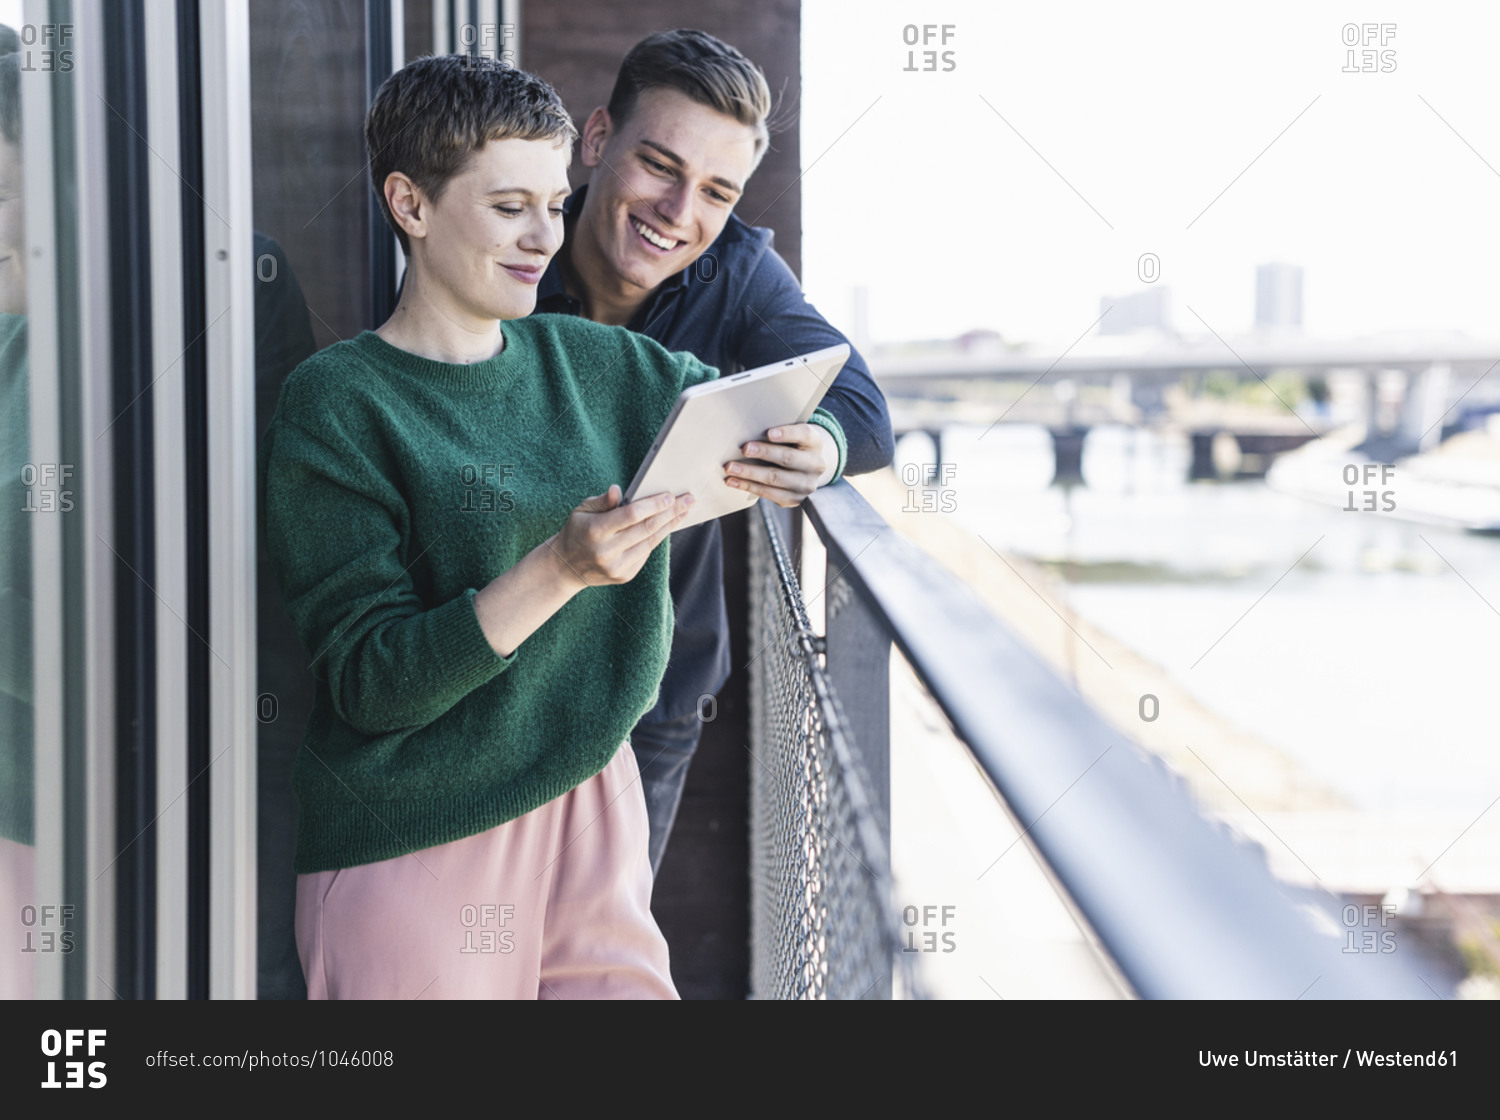 Smiling colleagues discussing over digital tablet while standing in balcony at office